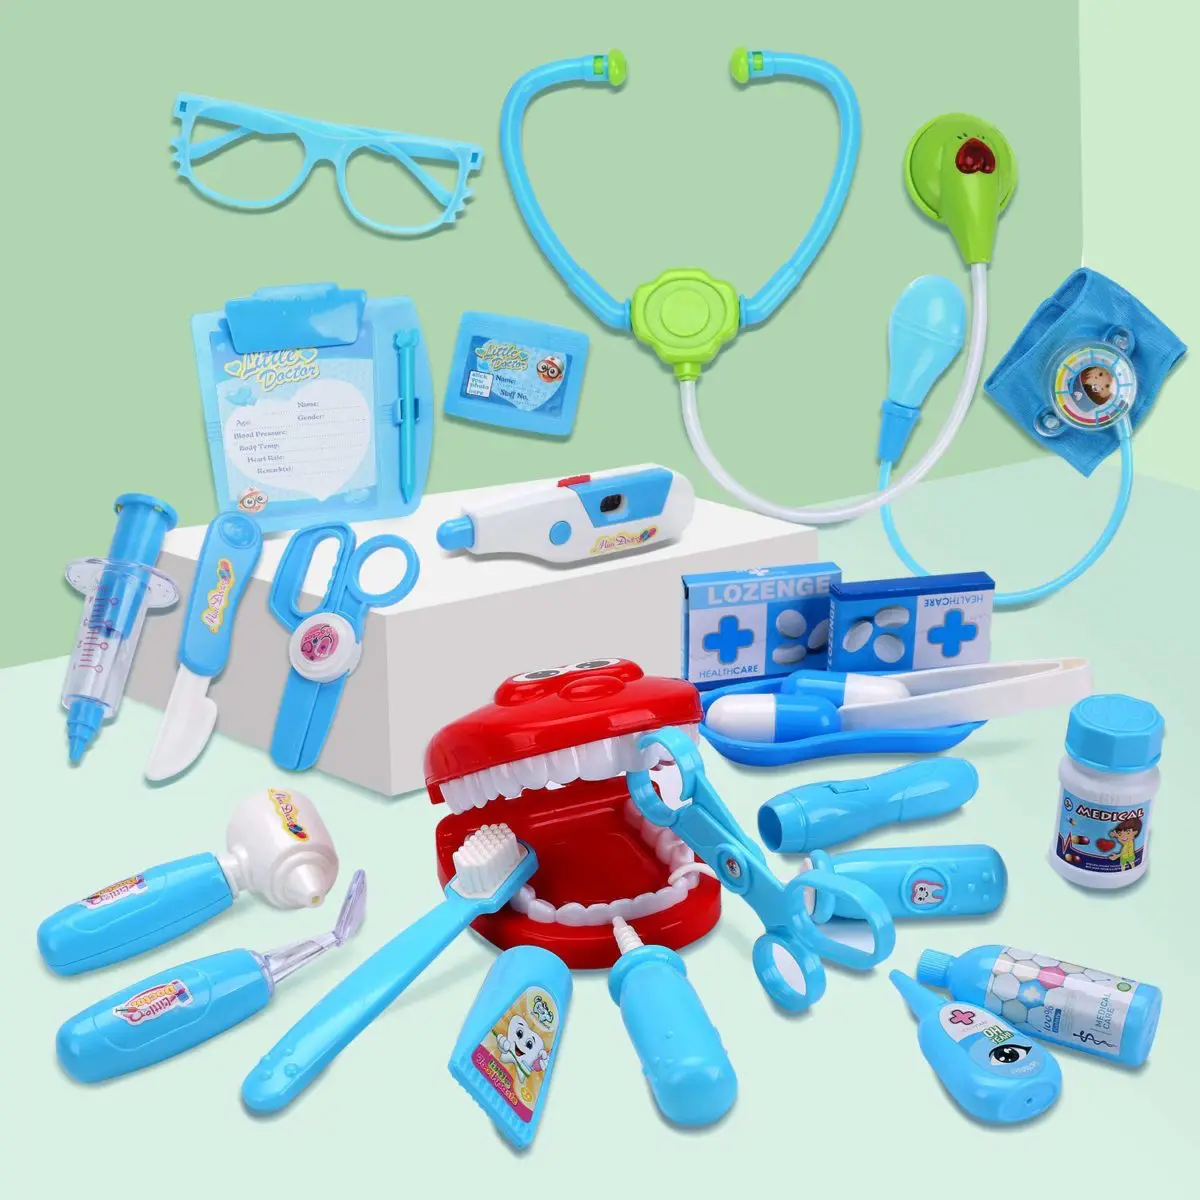 Cute Stone Toy Medical Kit - Top Toys and Gifts for Four Year Old Boys 2